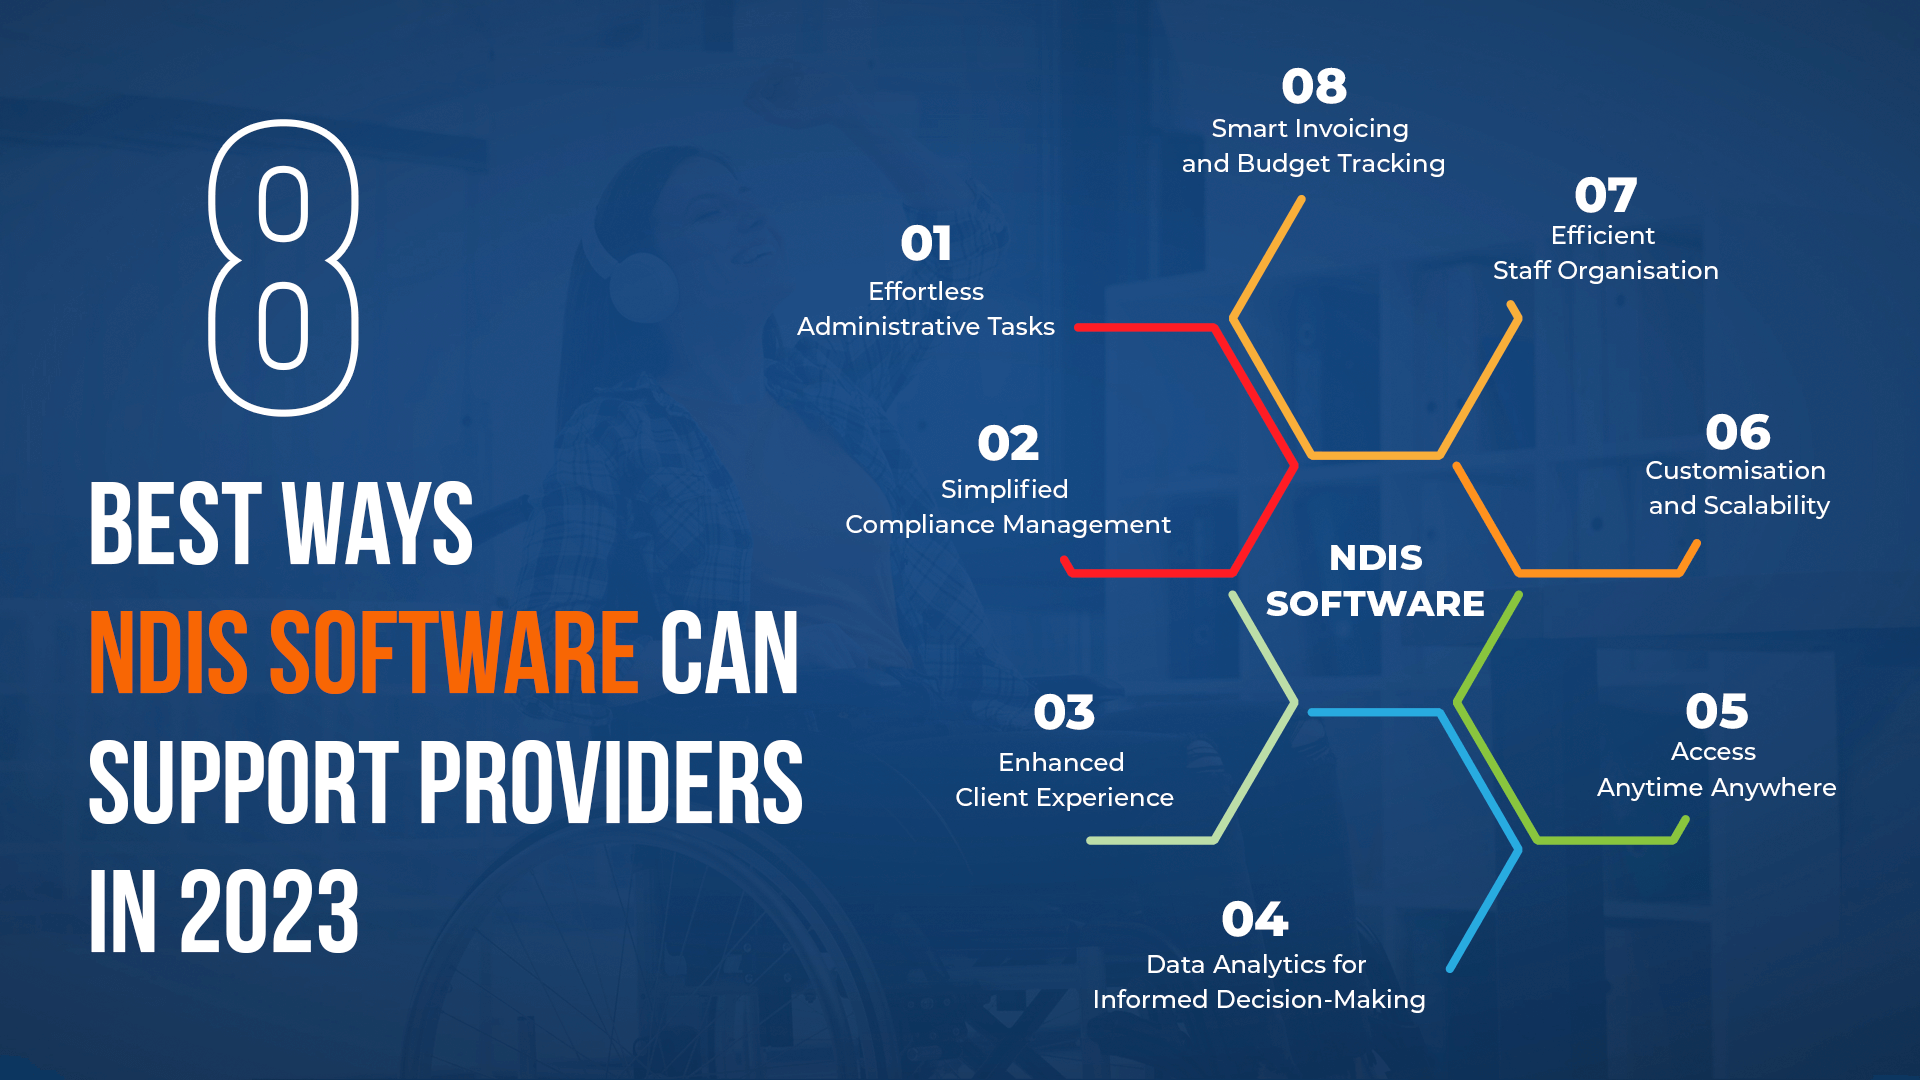 8 Best Ways NDIS Software Can Support Providers in 2023